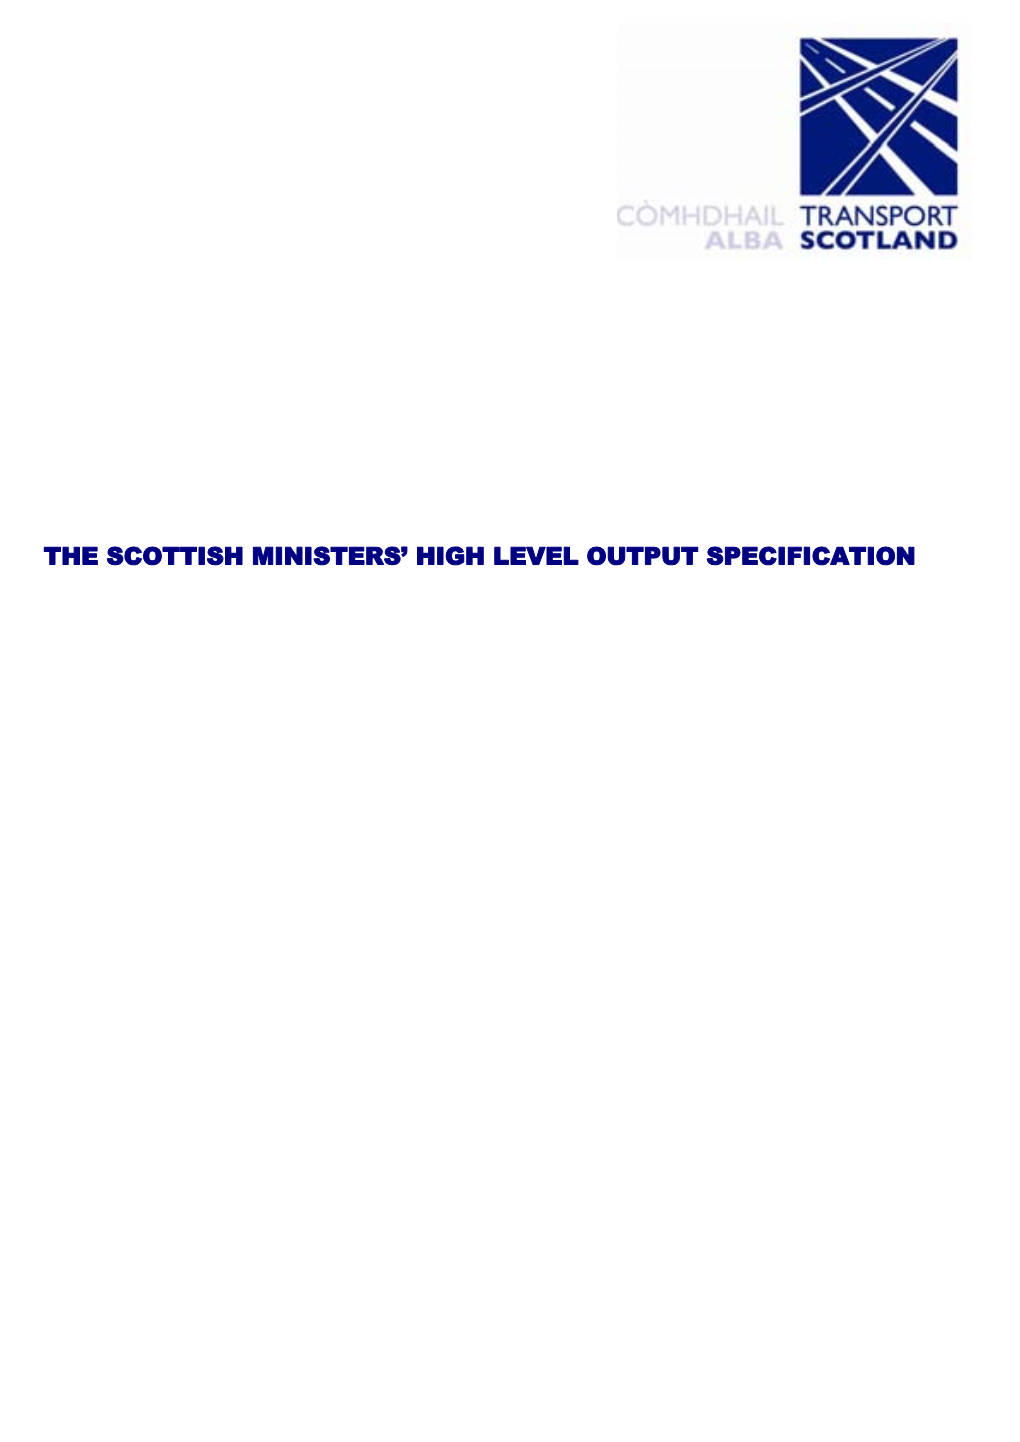 The Scottish Ministers' High Level Output Specification